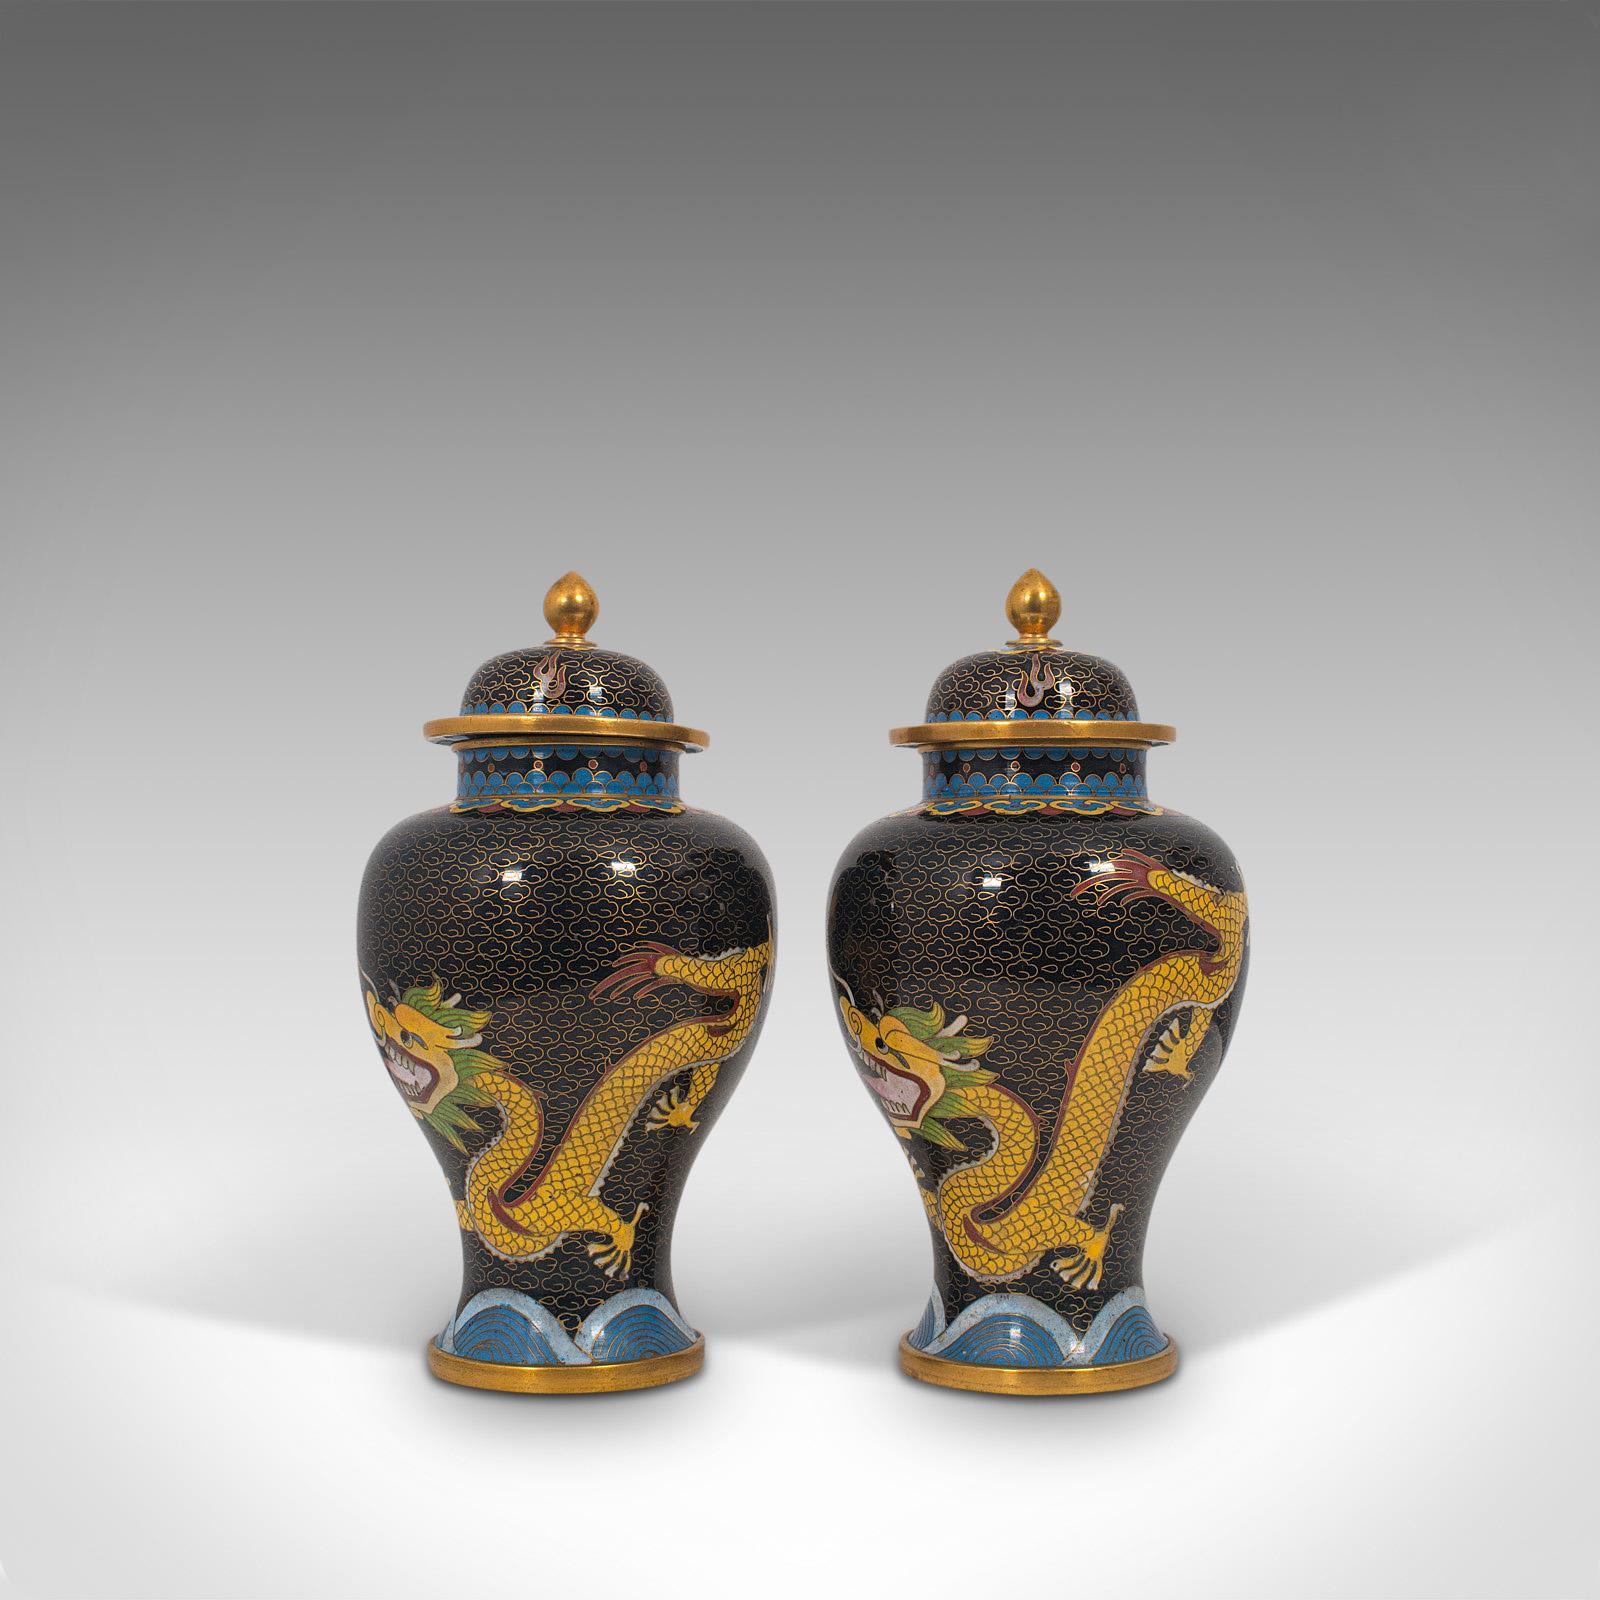 19th Century Antique Decorative Spice Jars, Chinese, Cloisonné, Baluster Urn circa 1900, Pair For Sale